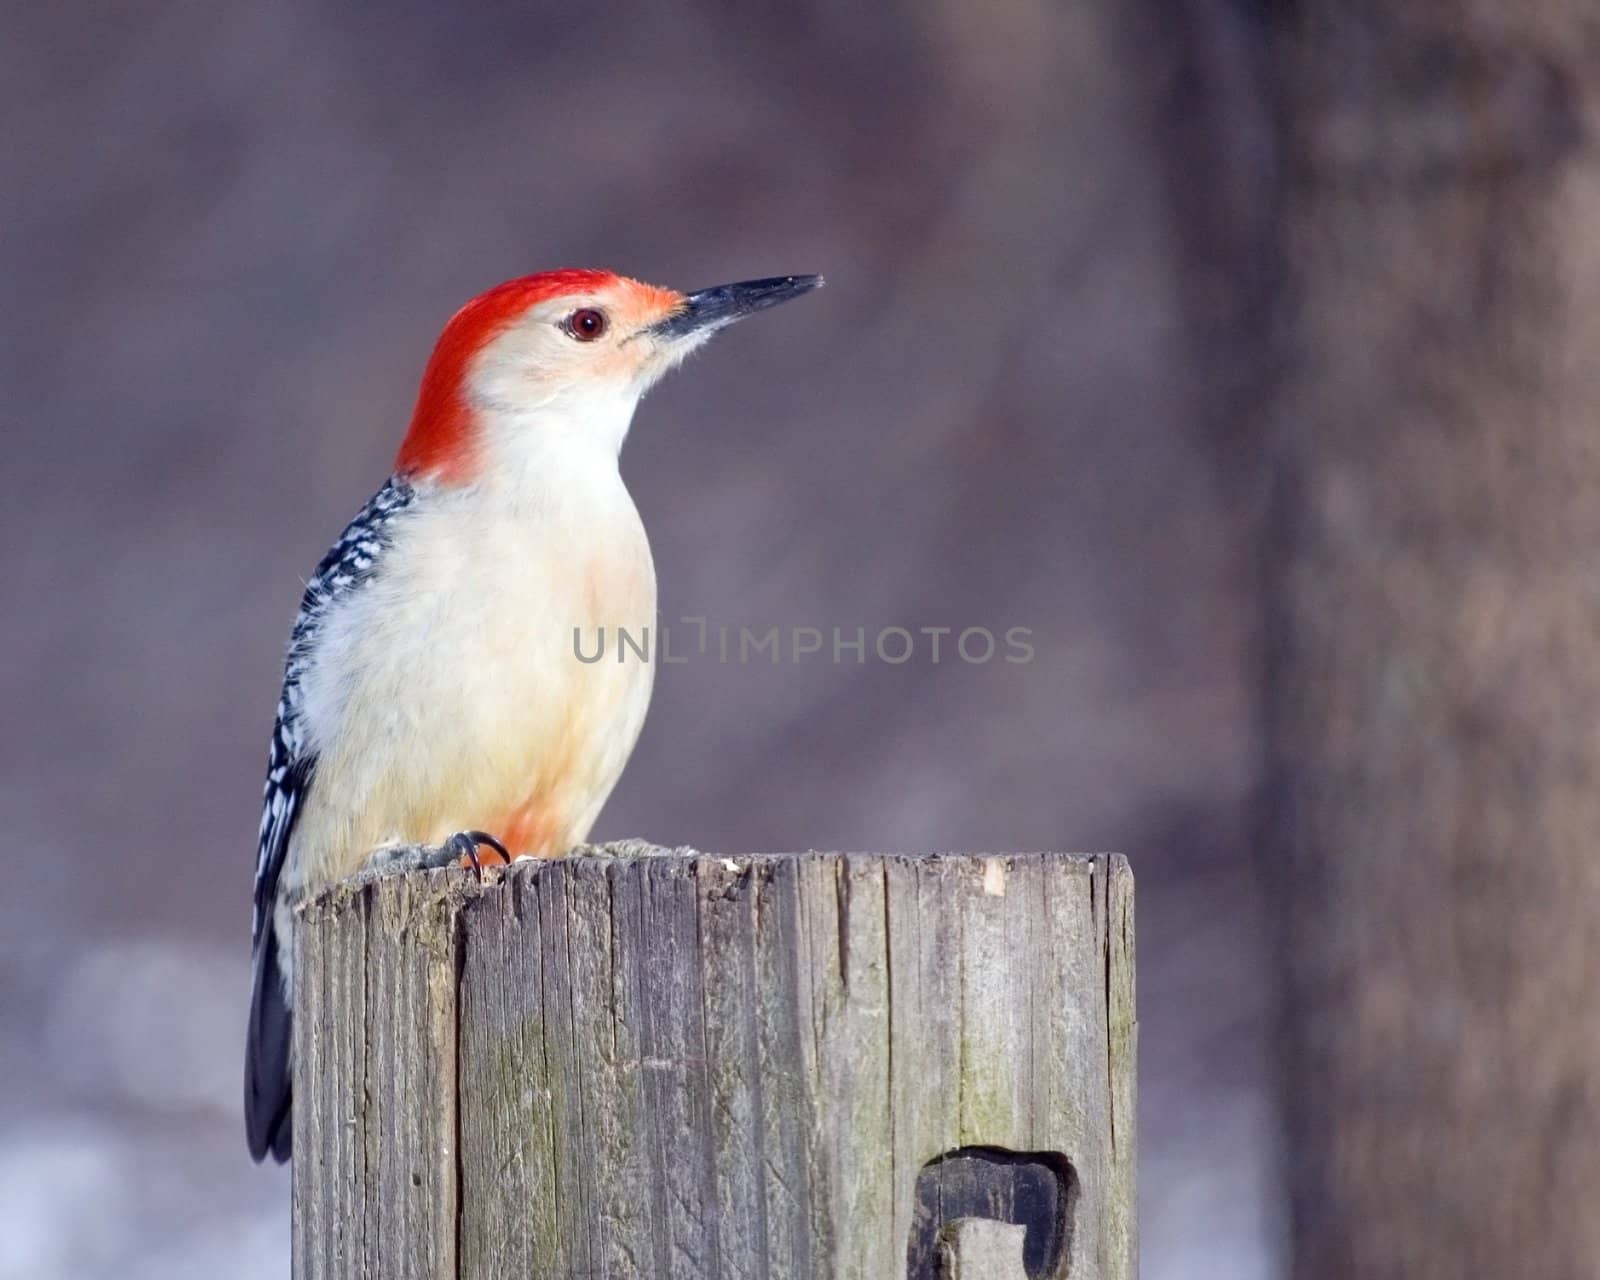 A red-bellied woodpecker perched on a post.